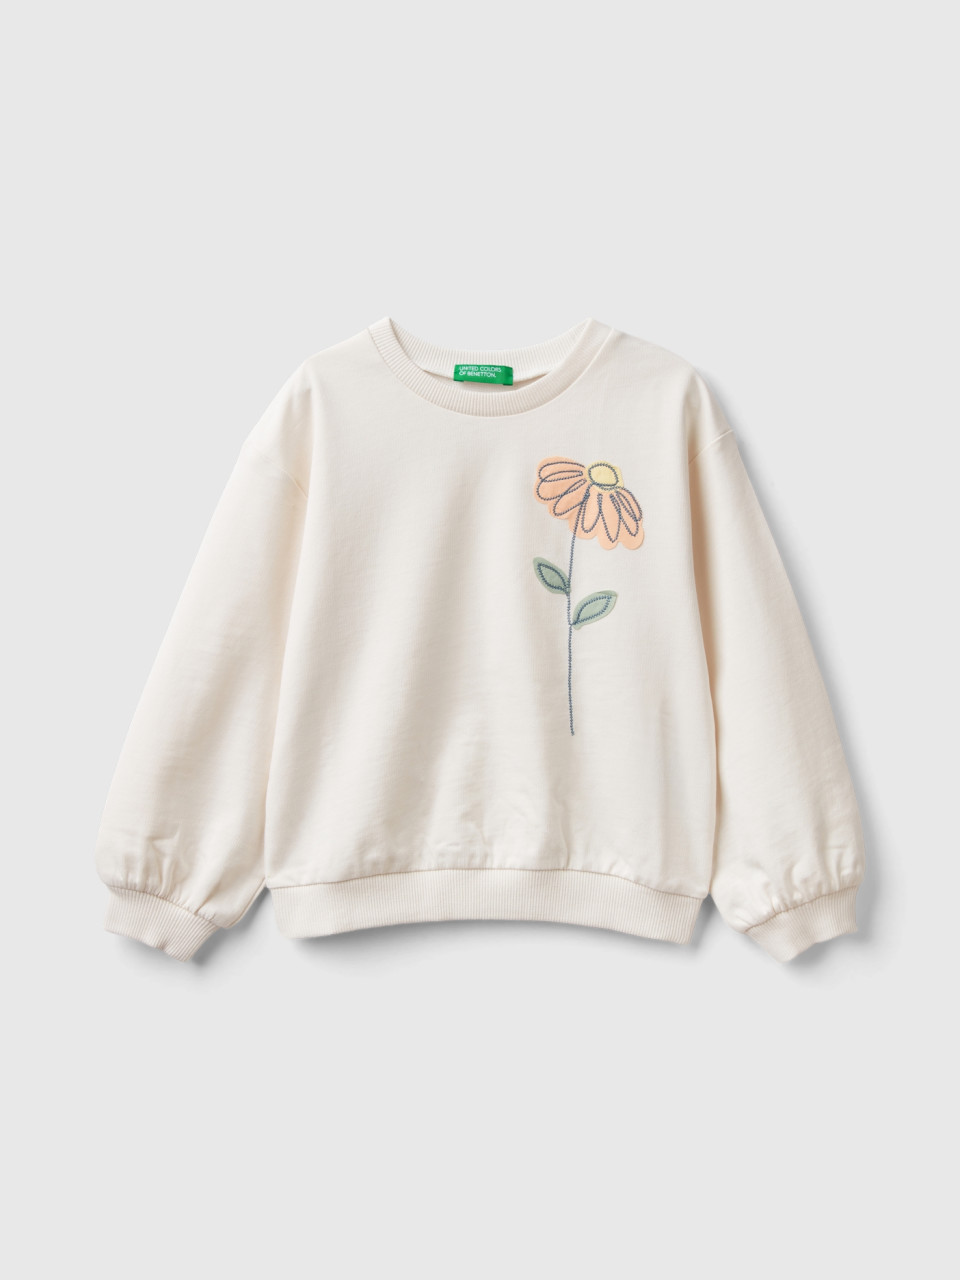 Benetton, Sweatshirt With Floral Embroidery, Creamy White, Kids